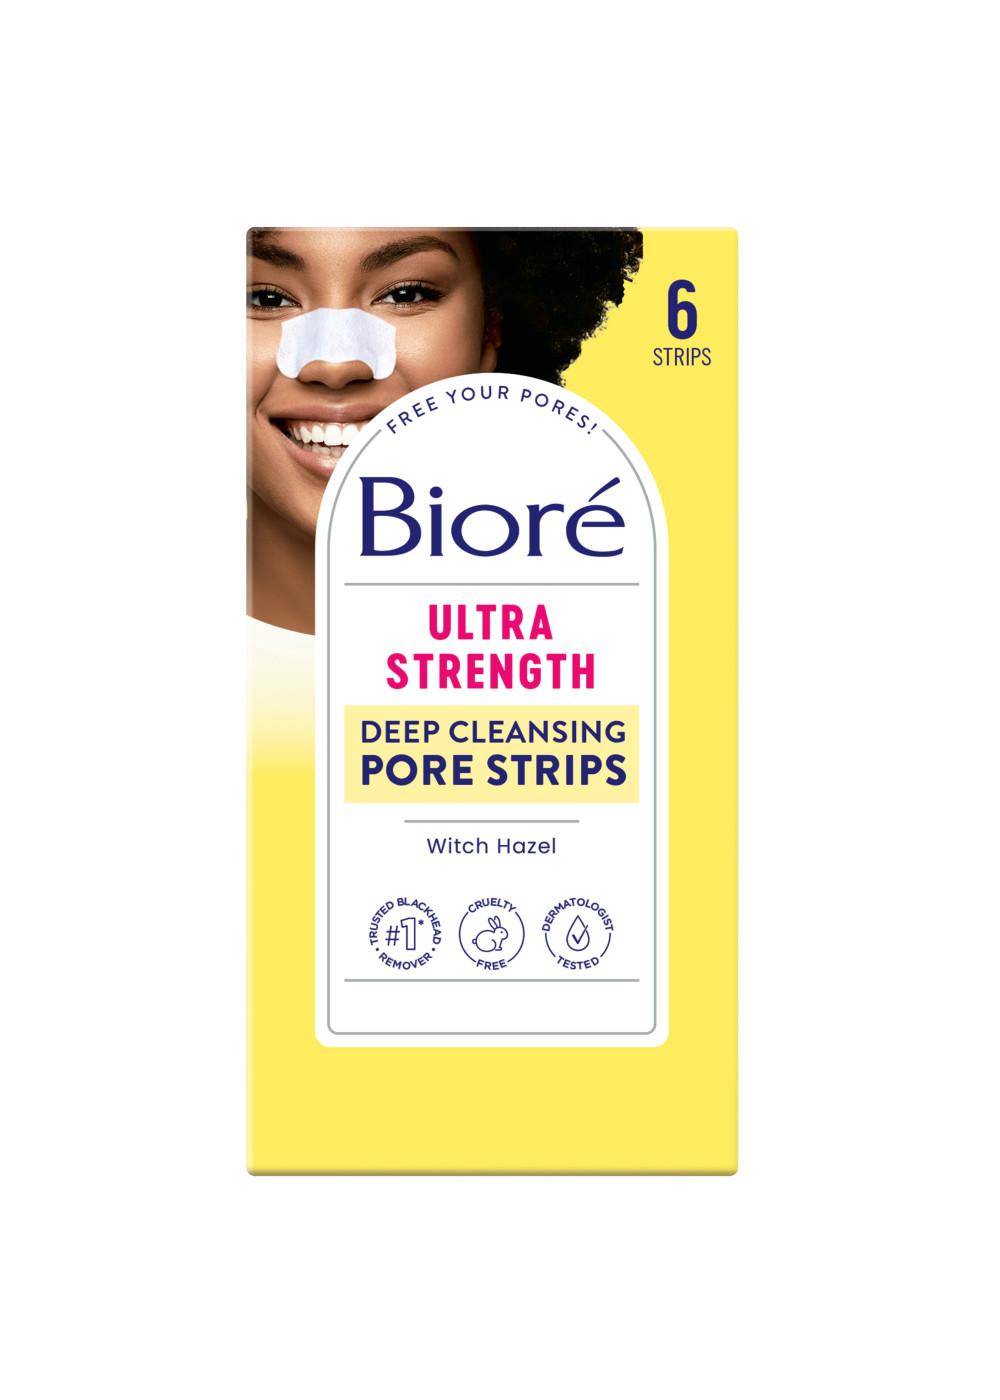 Bioré Ultra Strength Deep Cleansing Pore Strips with Witch Hazel; image 1 of 11